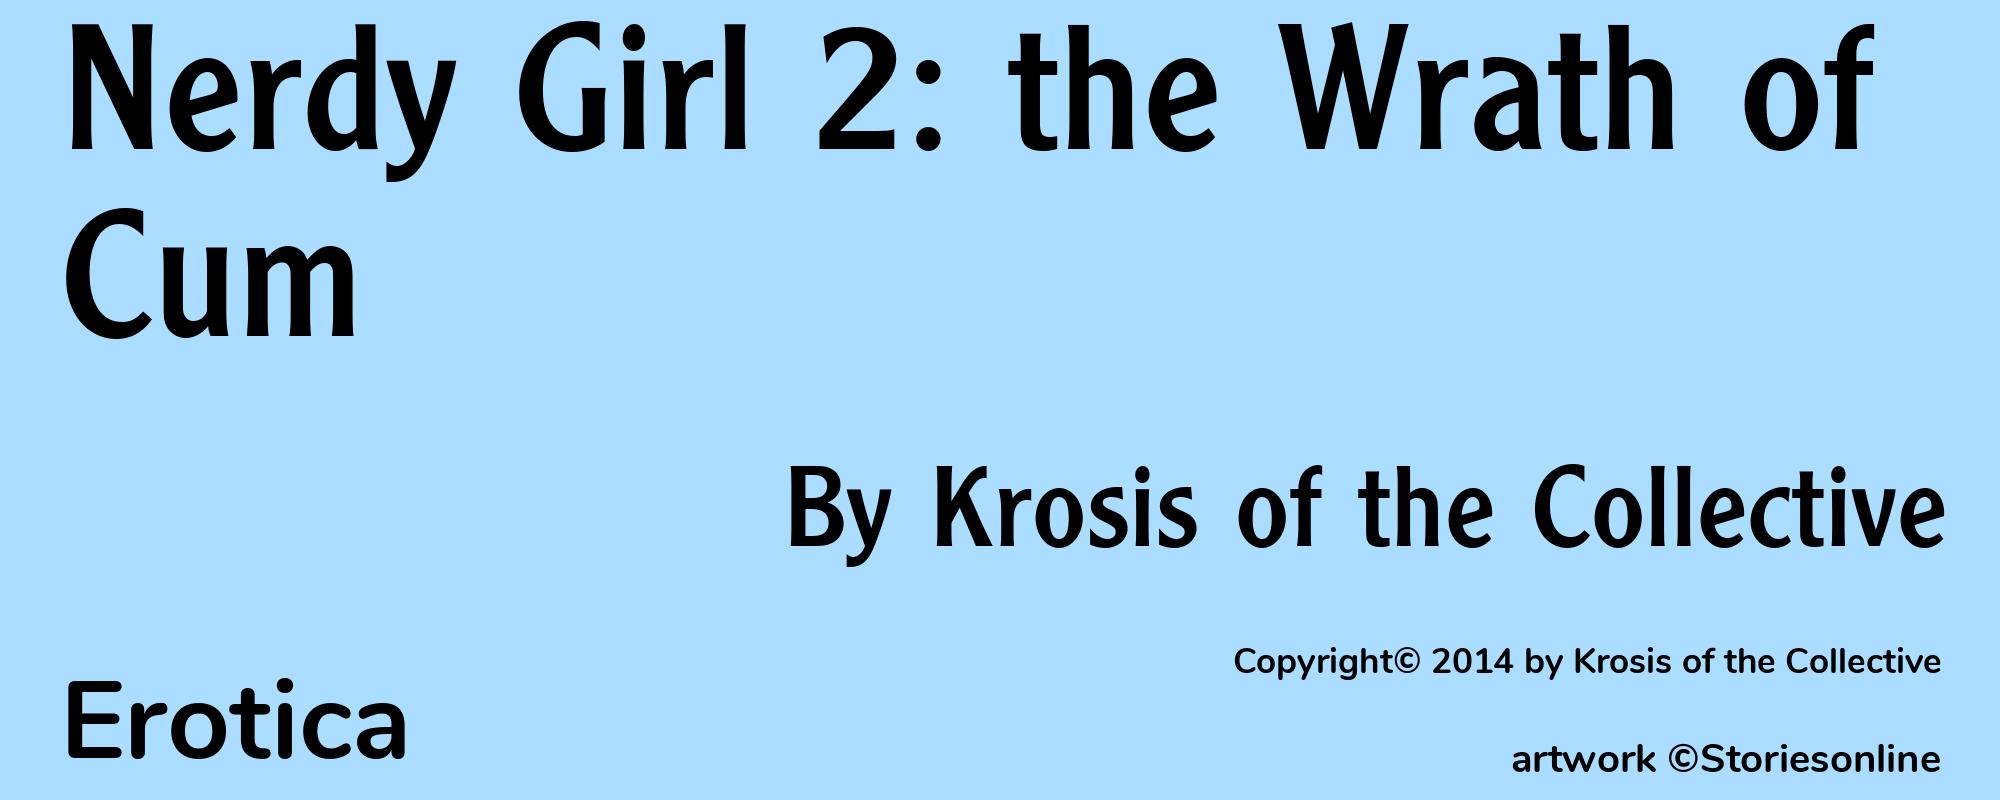 Nerdy Girl 2: the Wrath of Cum - Cover